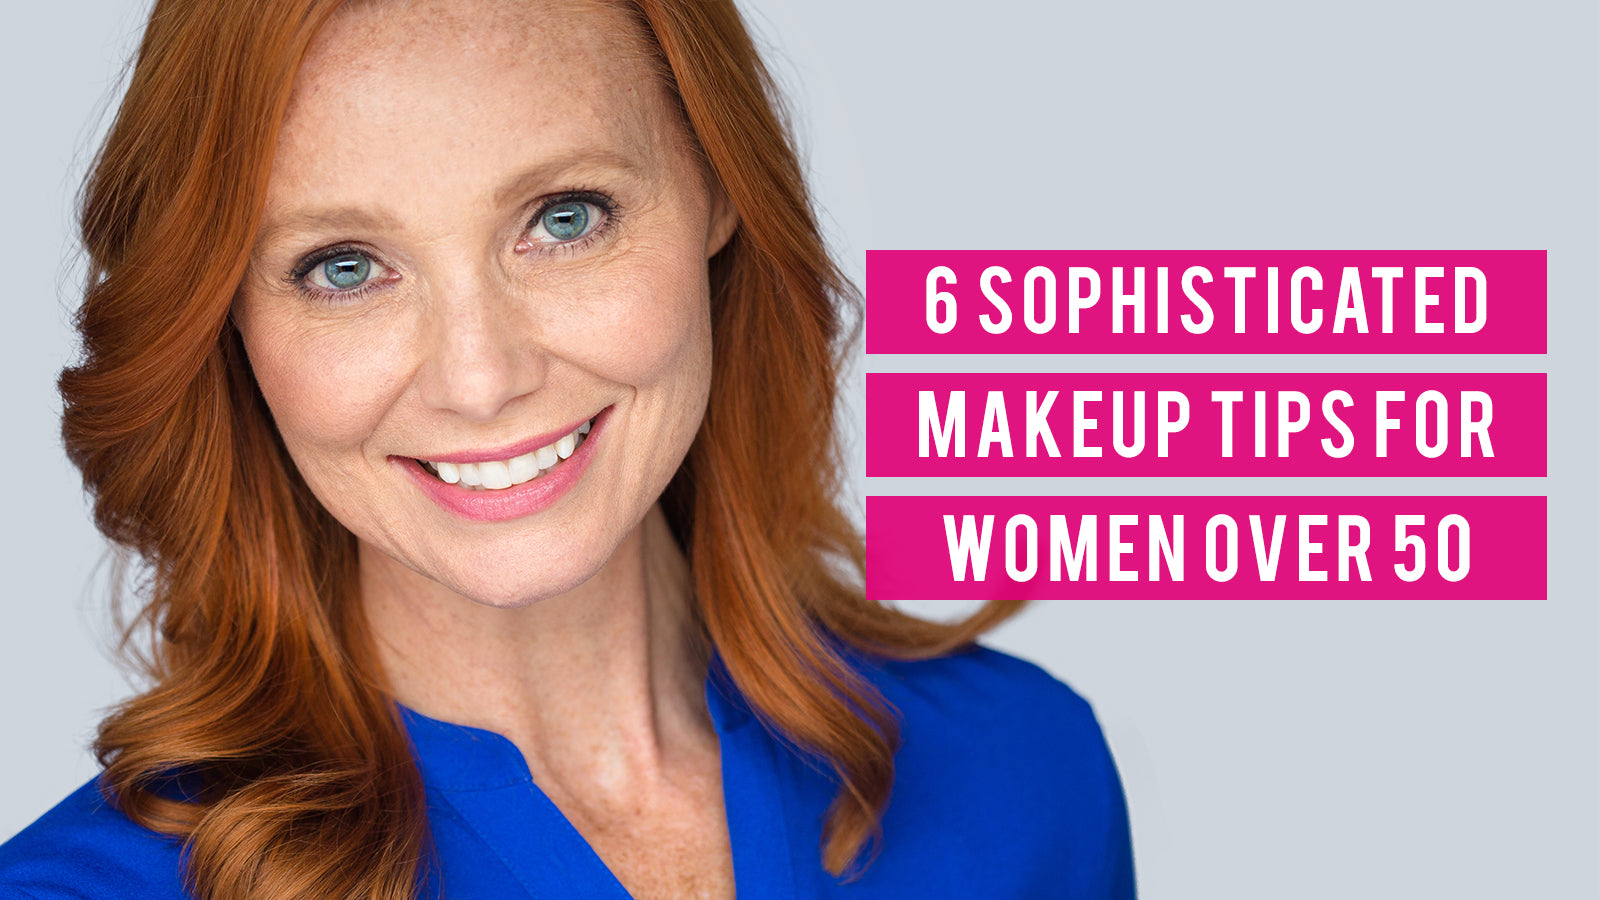 6. "Makeup Tips for Women Over 40 with Blue Eyes and Copper Hair" - wide 5